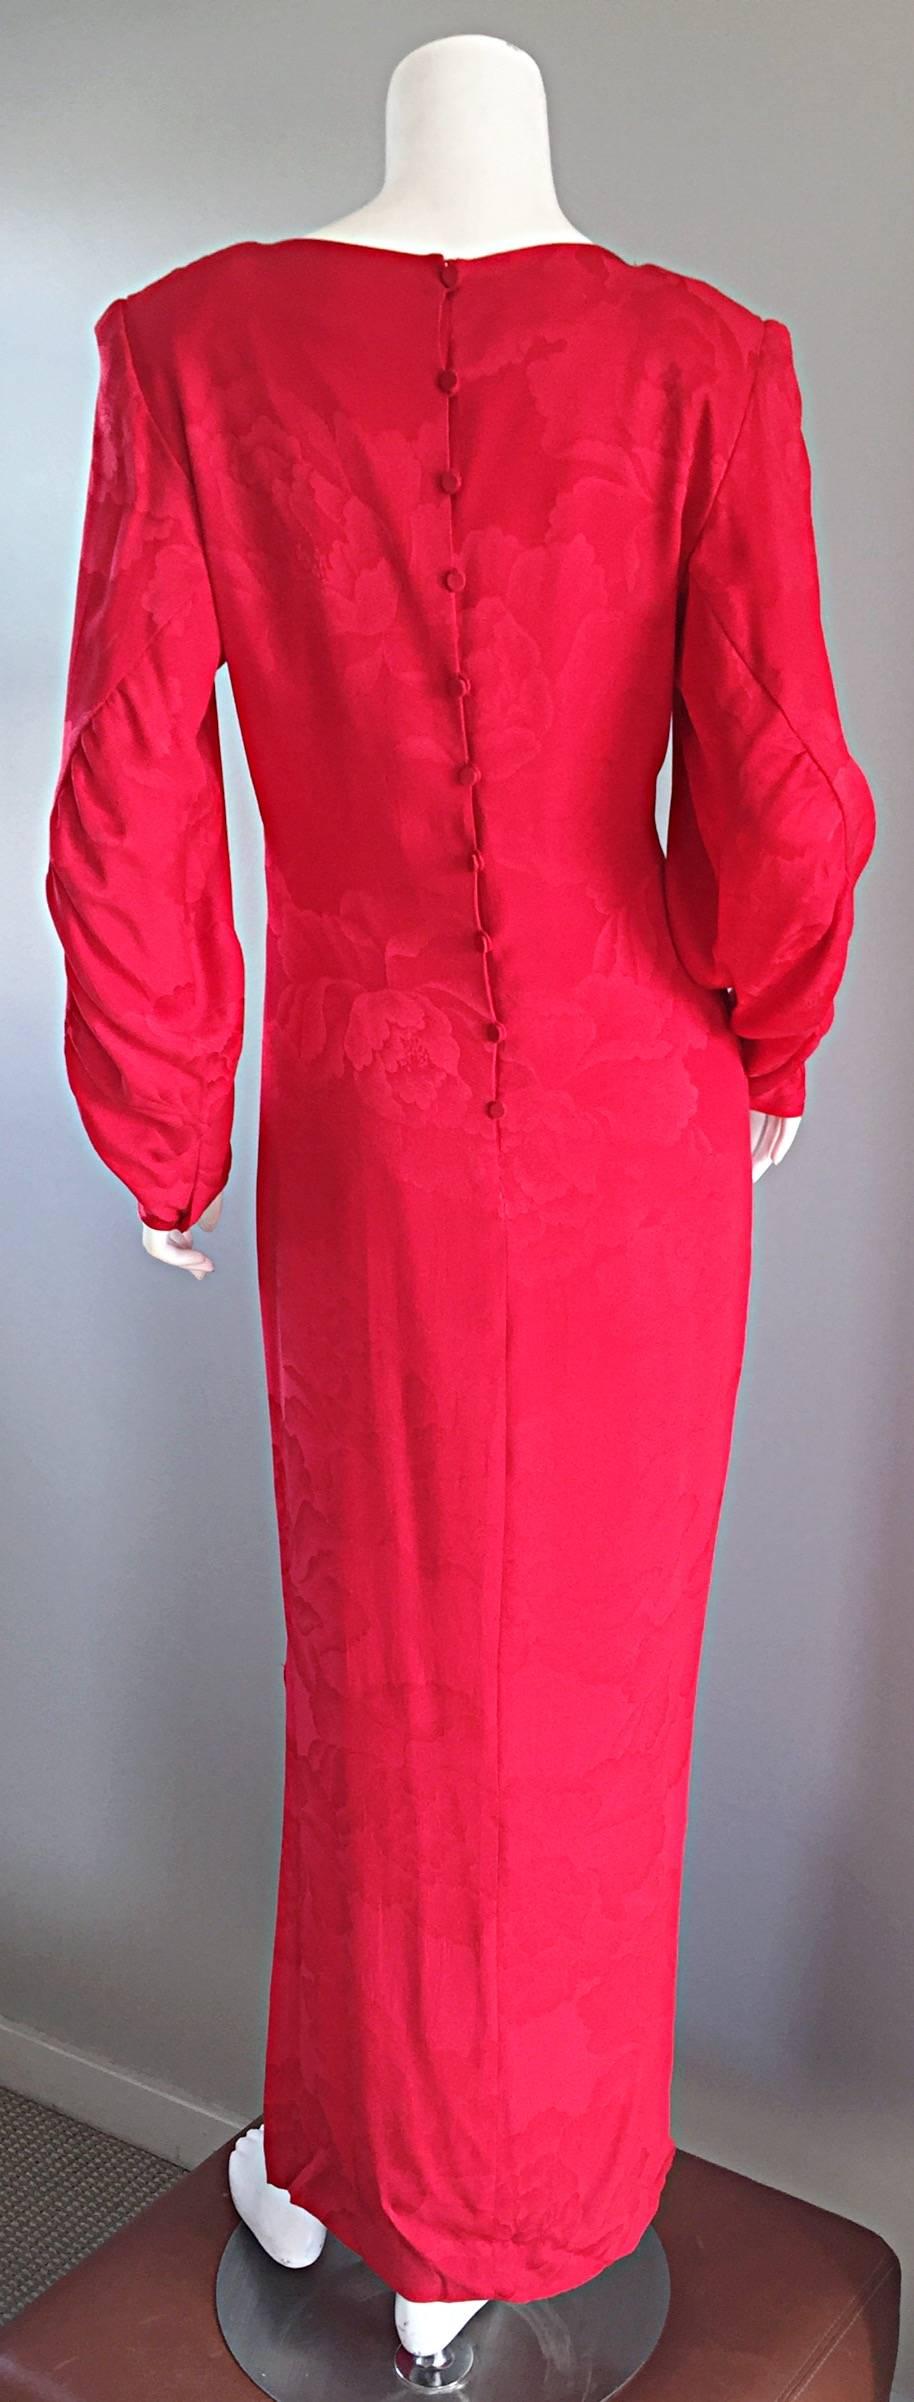 Beautiful Vintage Hanae Mori Lipstick Red Silk Beaded Floral Dress / Gown 2